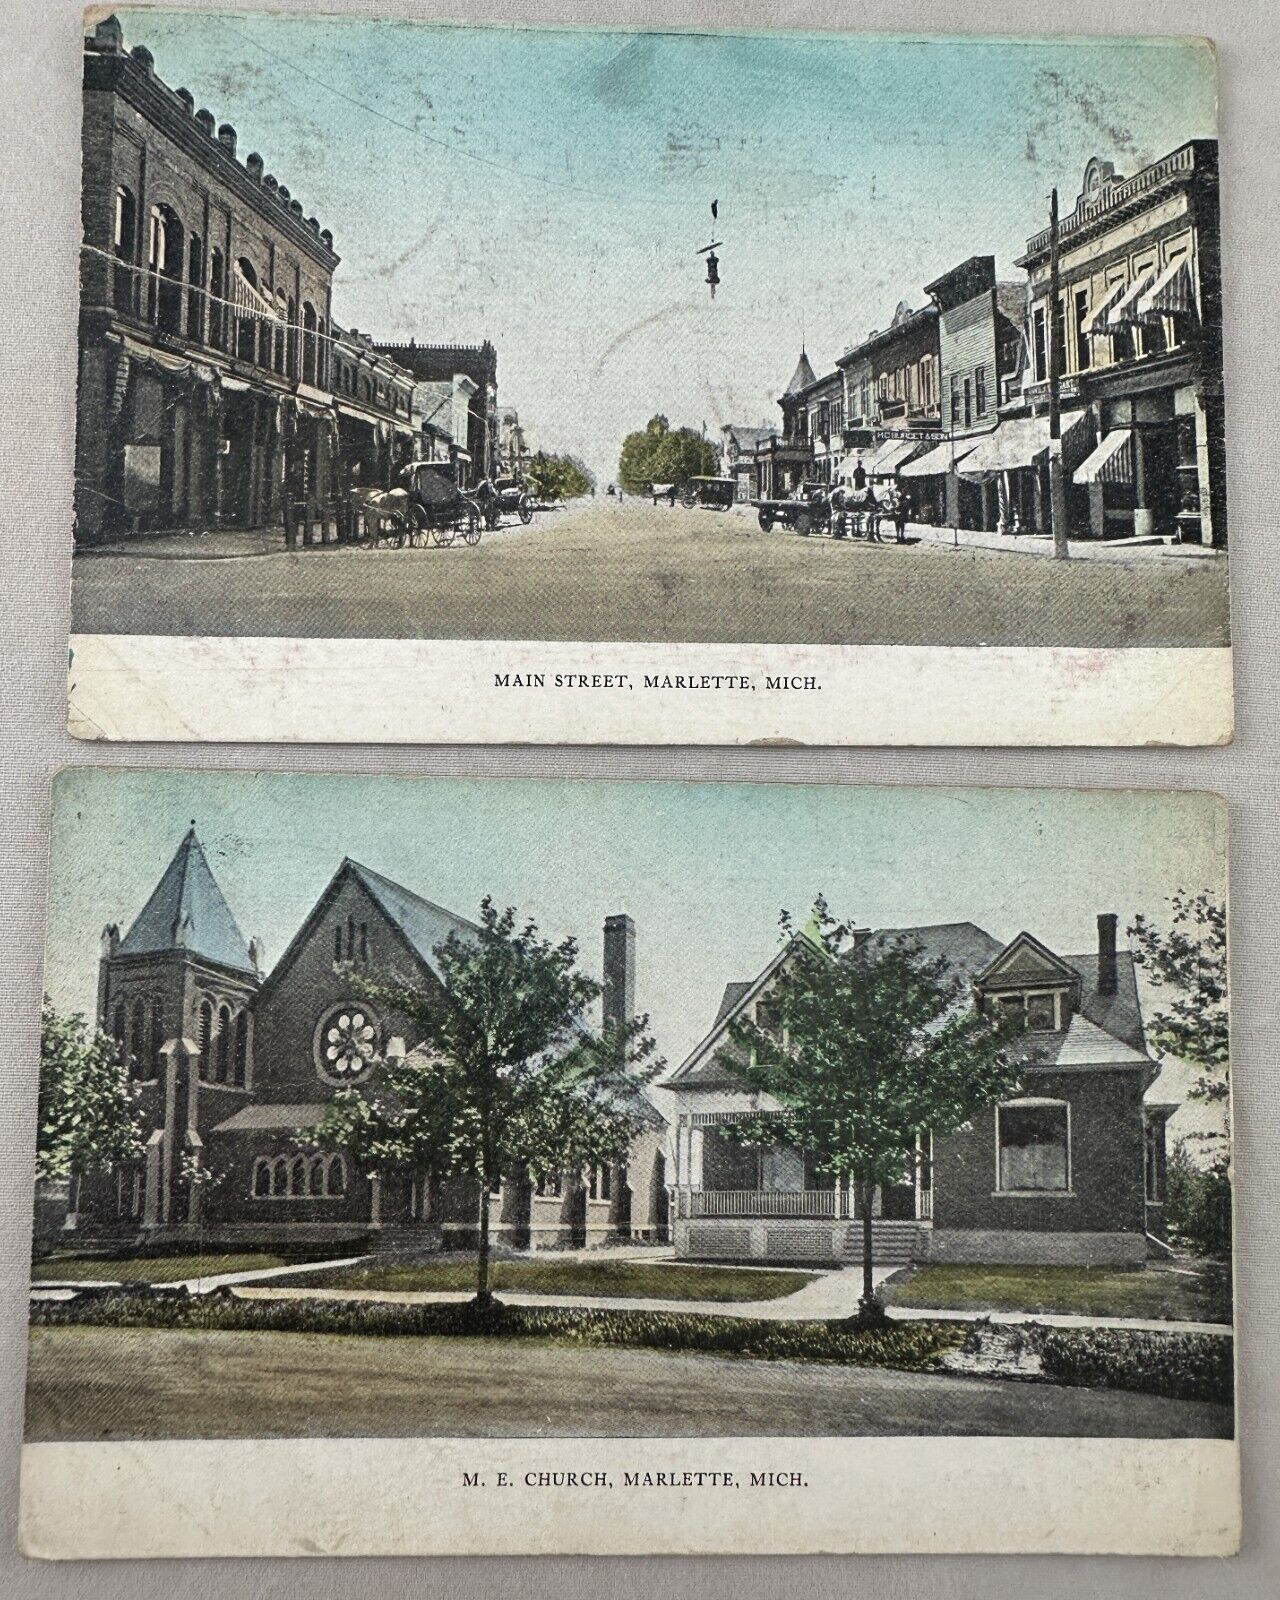 Antique Postcard Marlette Michigan Methodist Church and Main Street early 1900s